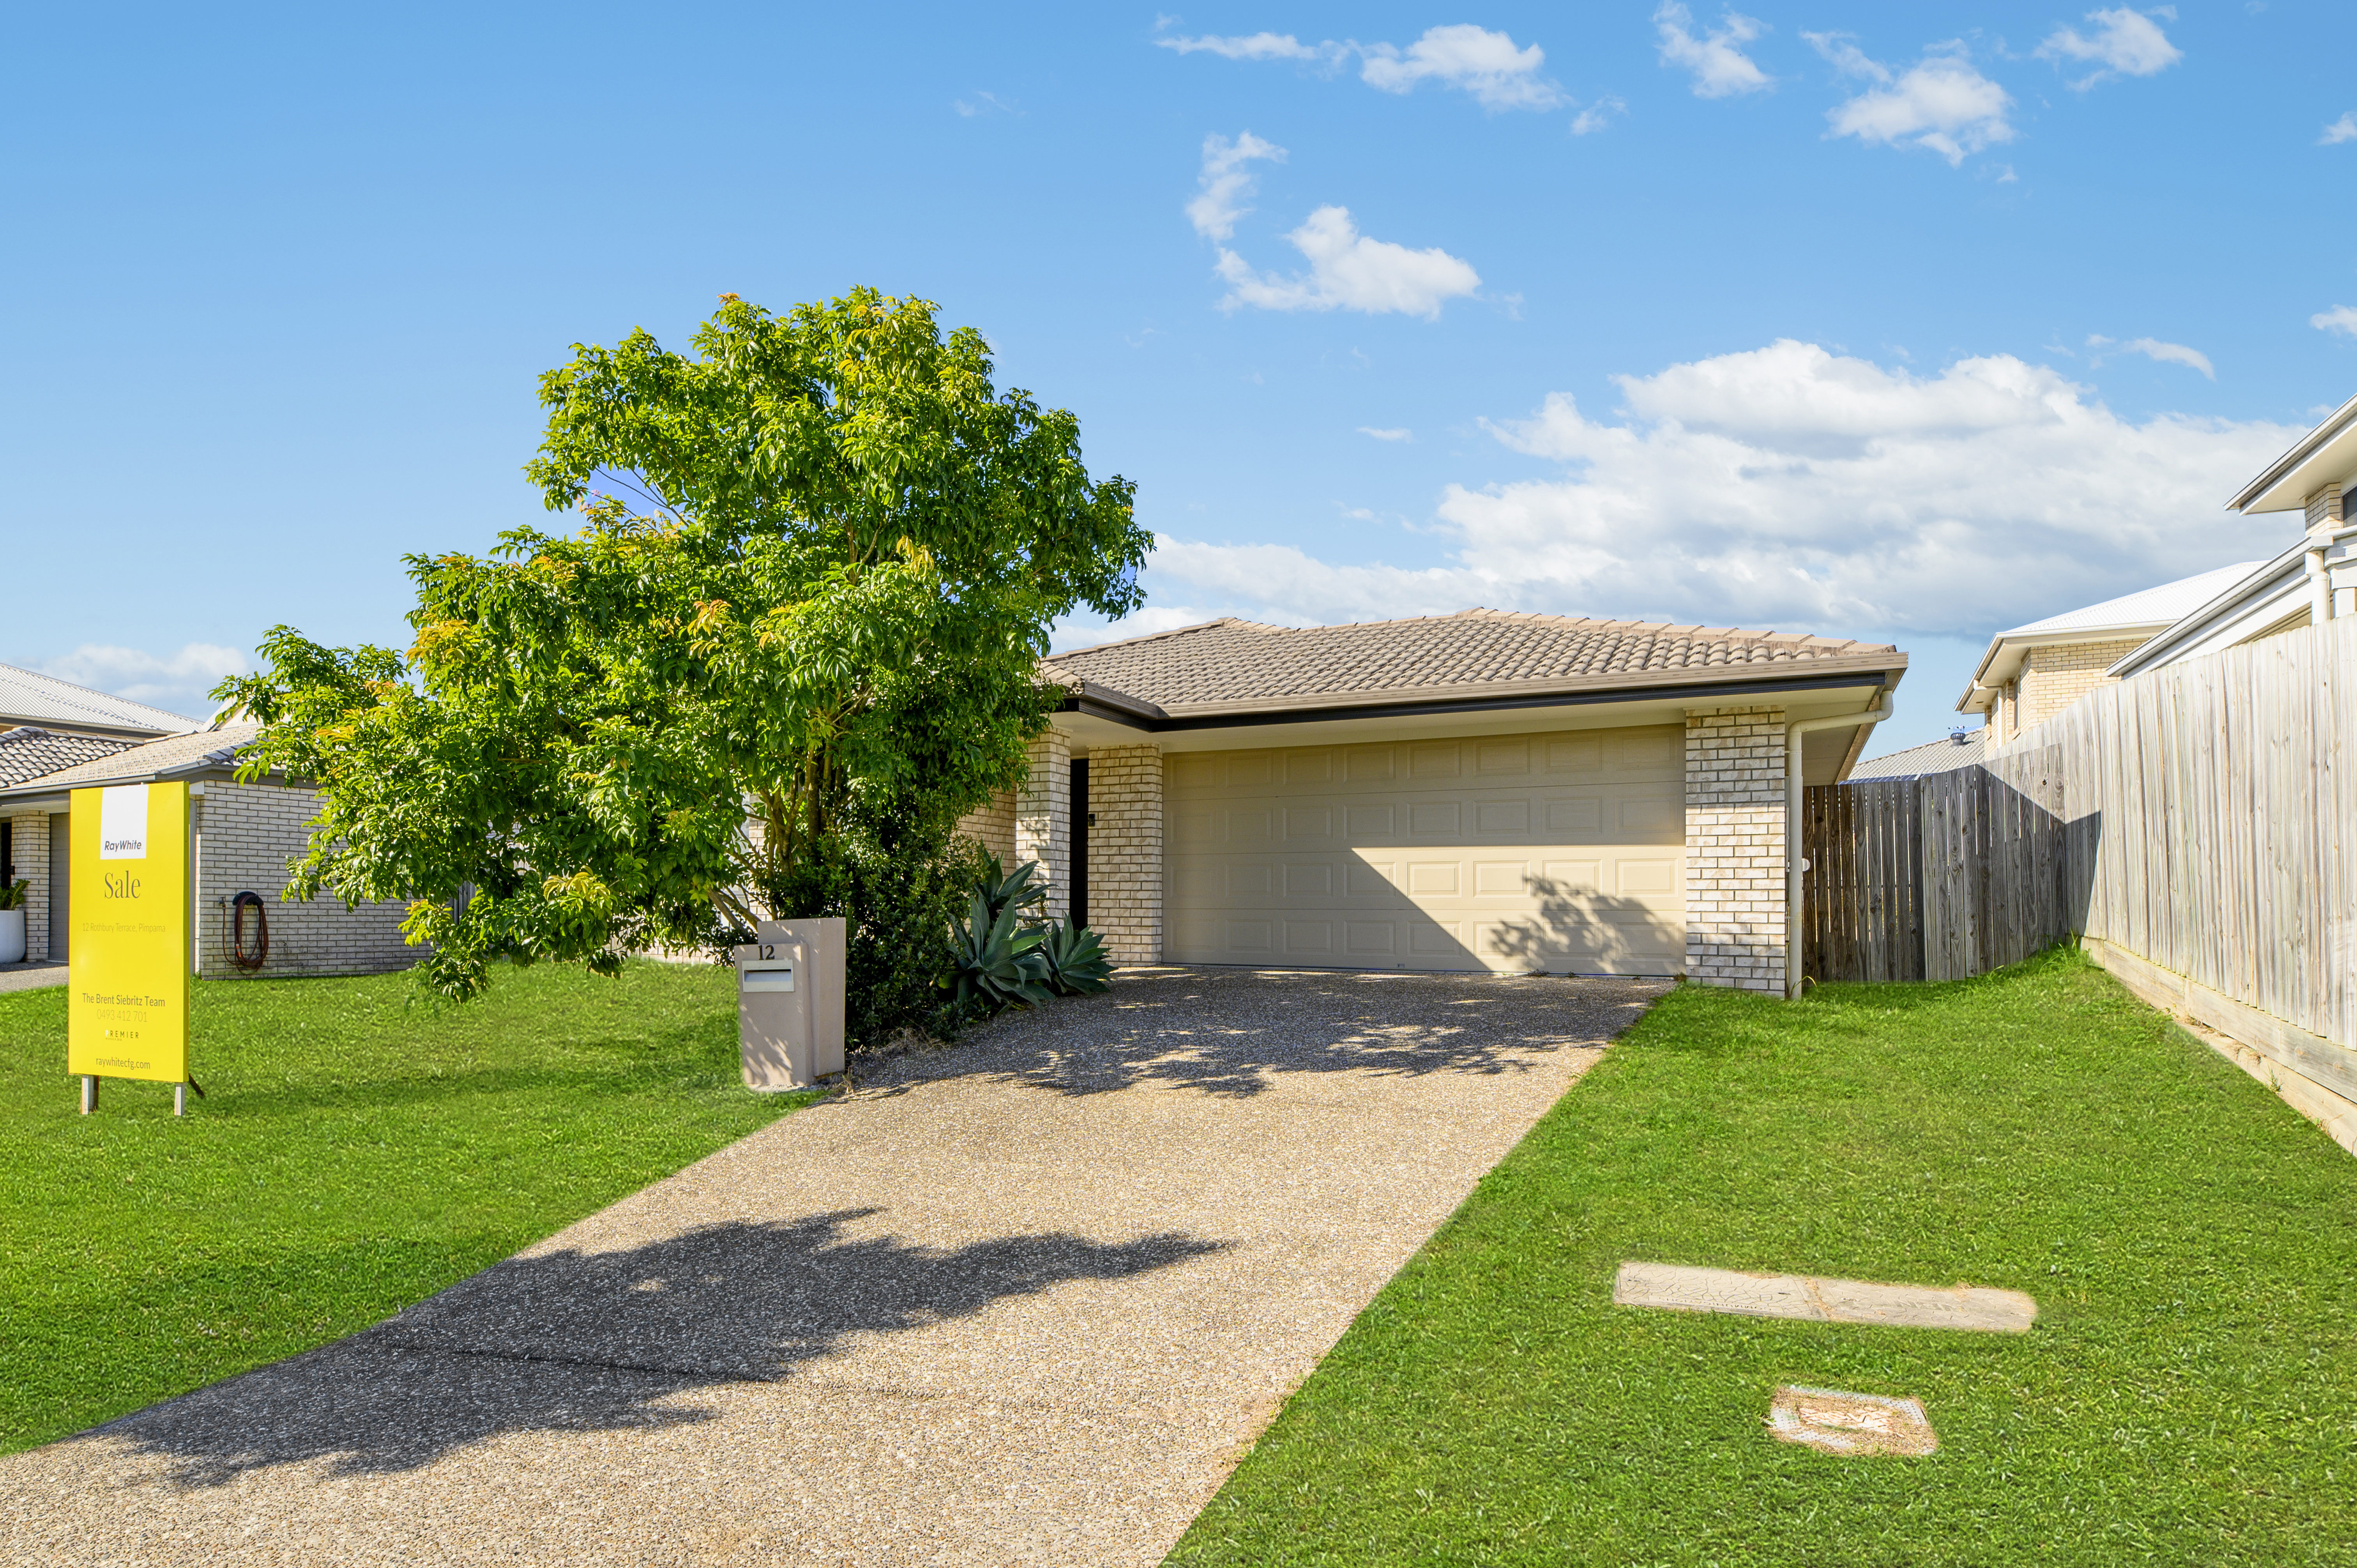 Pimpama 4Kwarto Don't Miss This Stunning Opportunity!